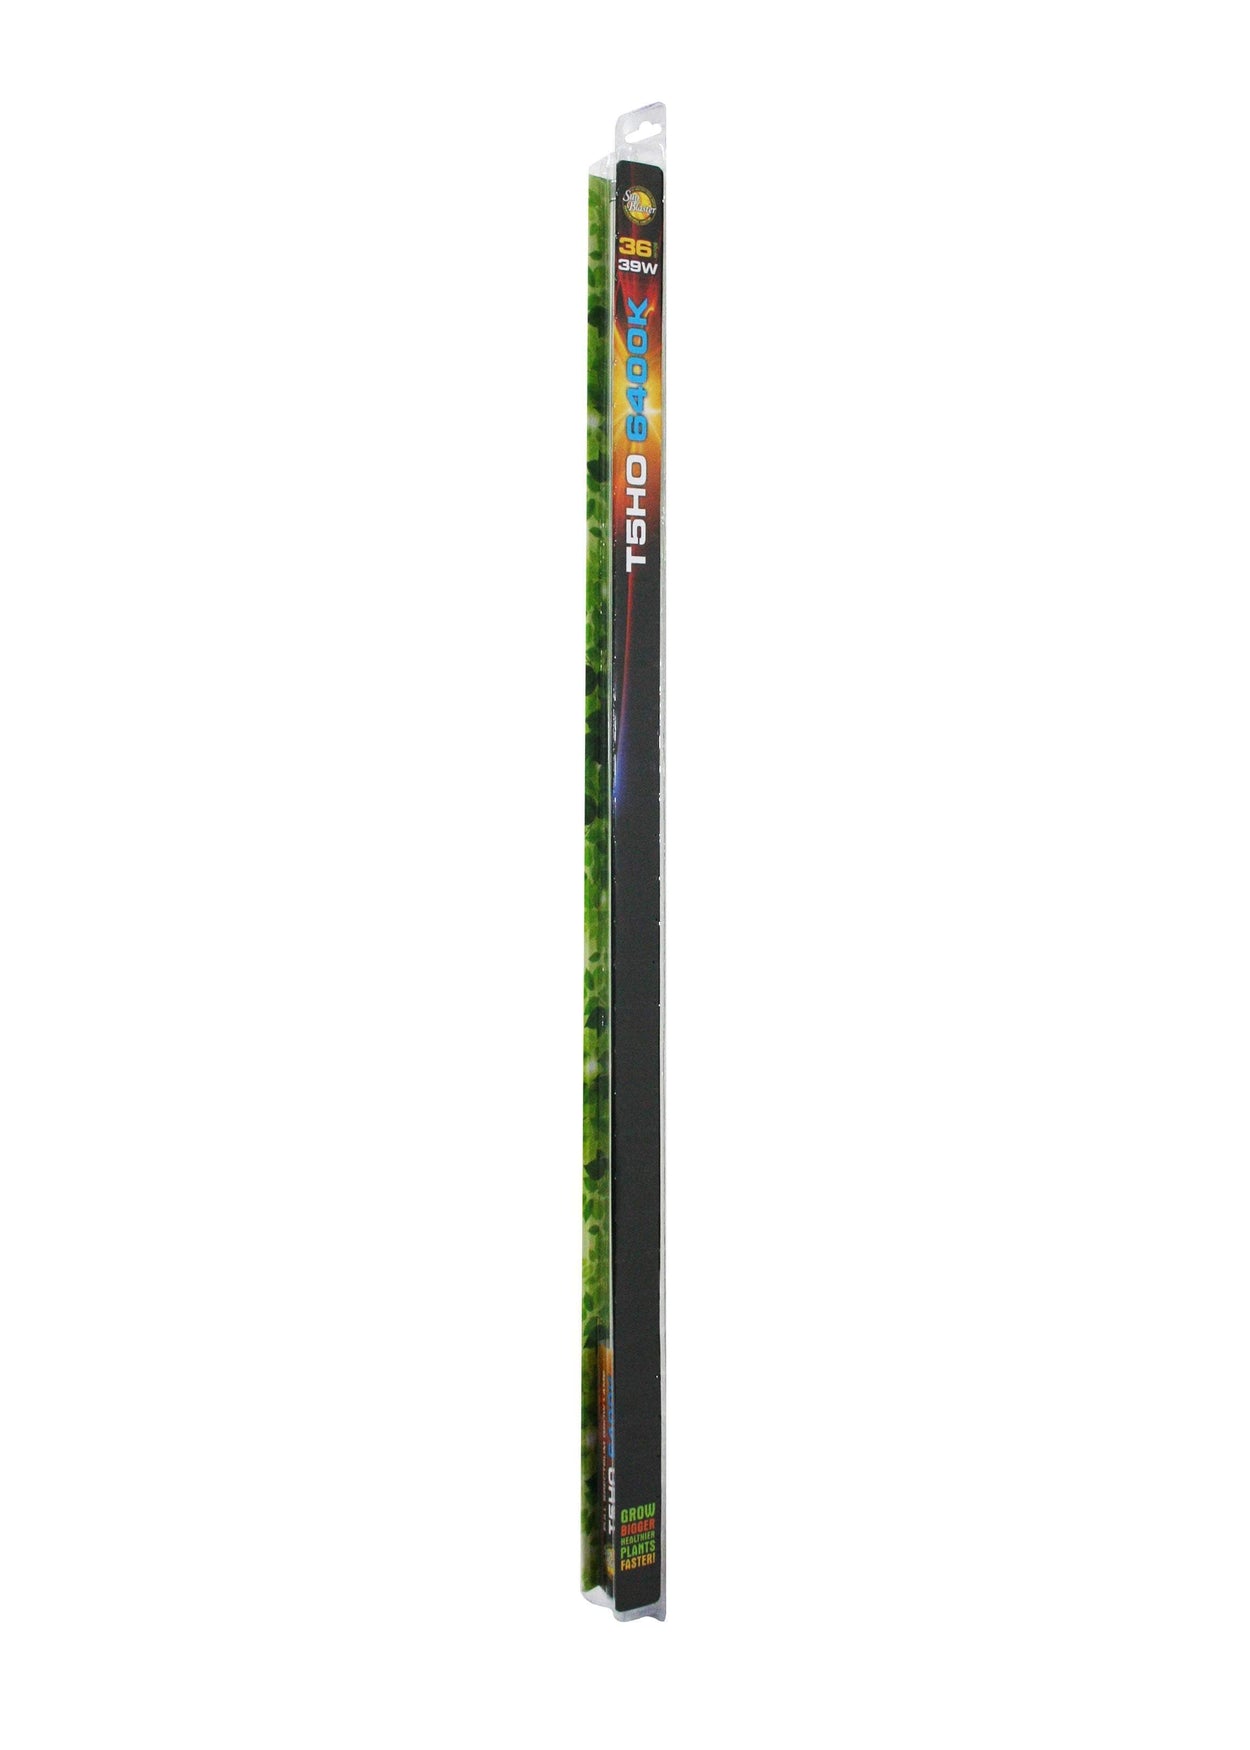 36" Sunblaster Bulb. For the Nutritower V1 Gardening products, Tower Parts &amp; Accessories nutritower 